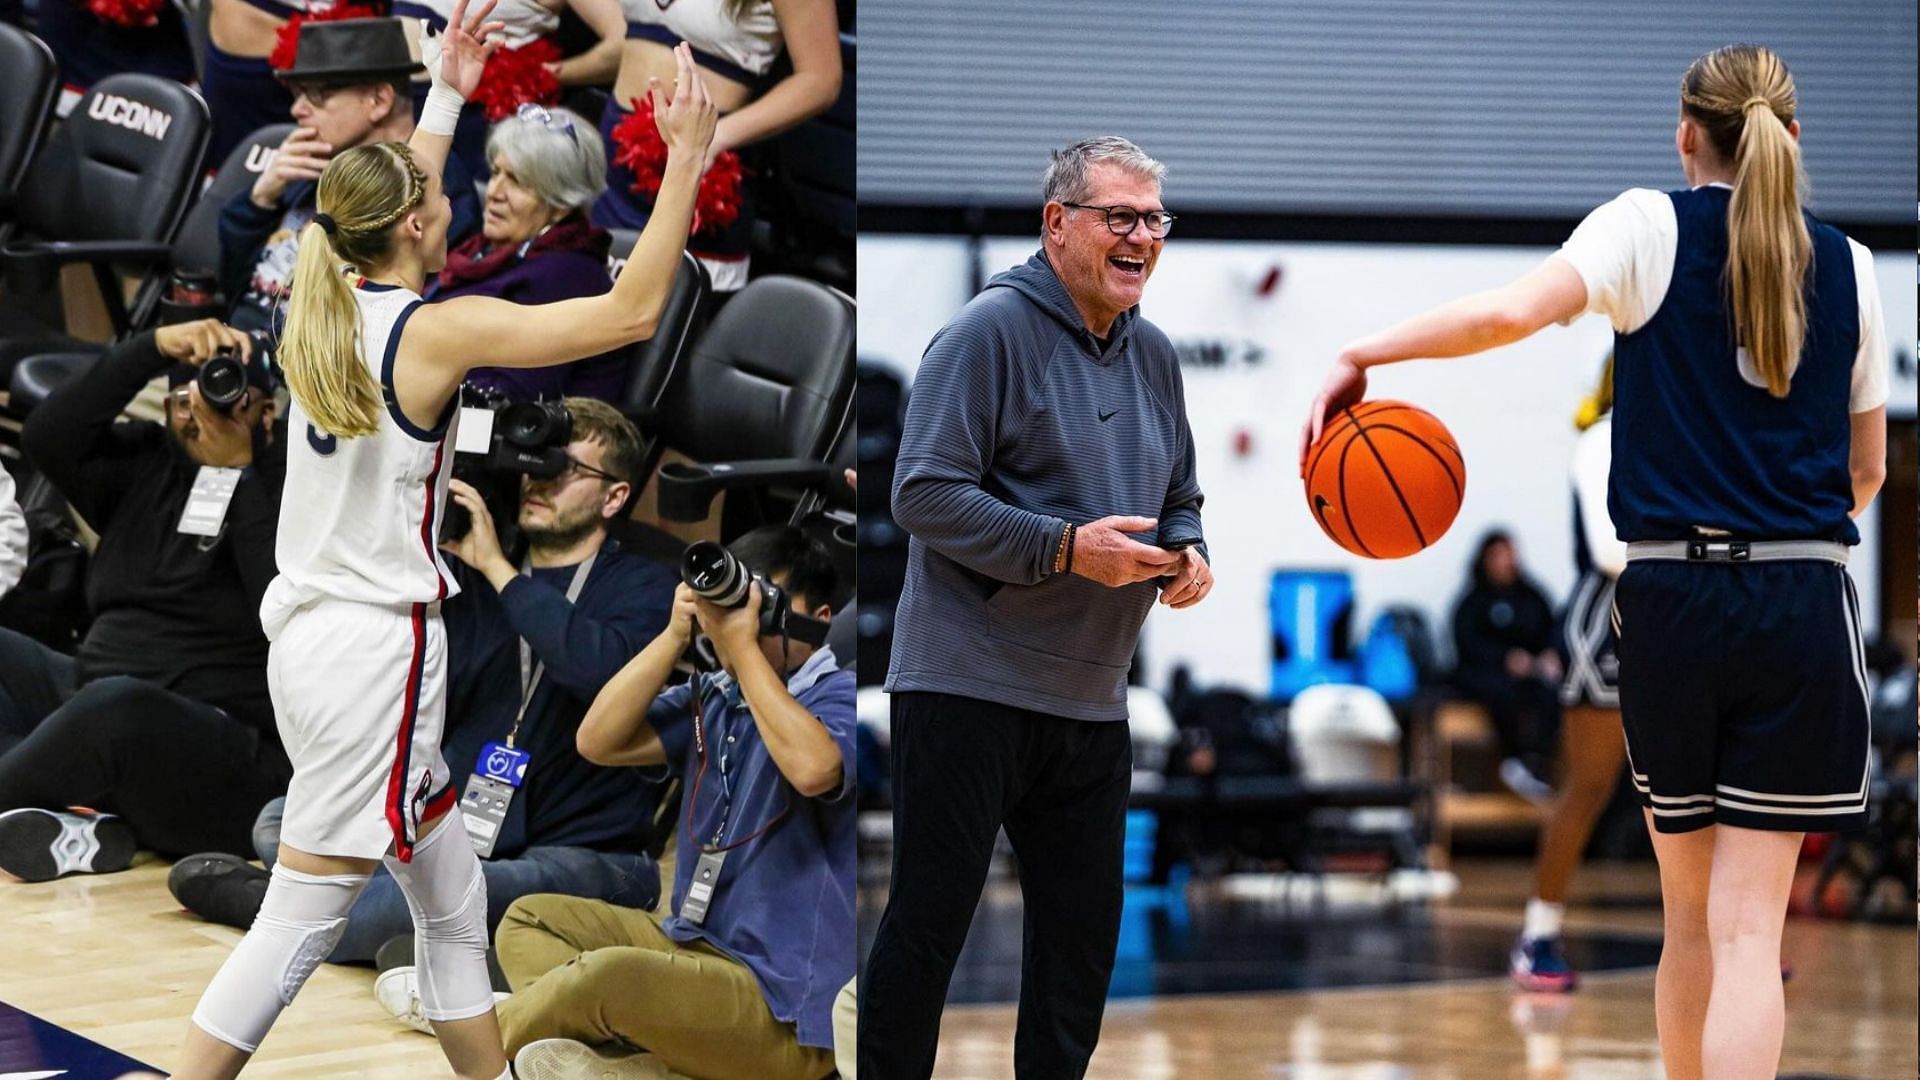 UConn basketball star, Paige Bueckers and coach Geno Auriemma